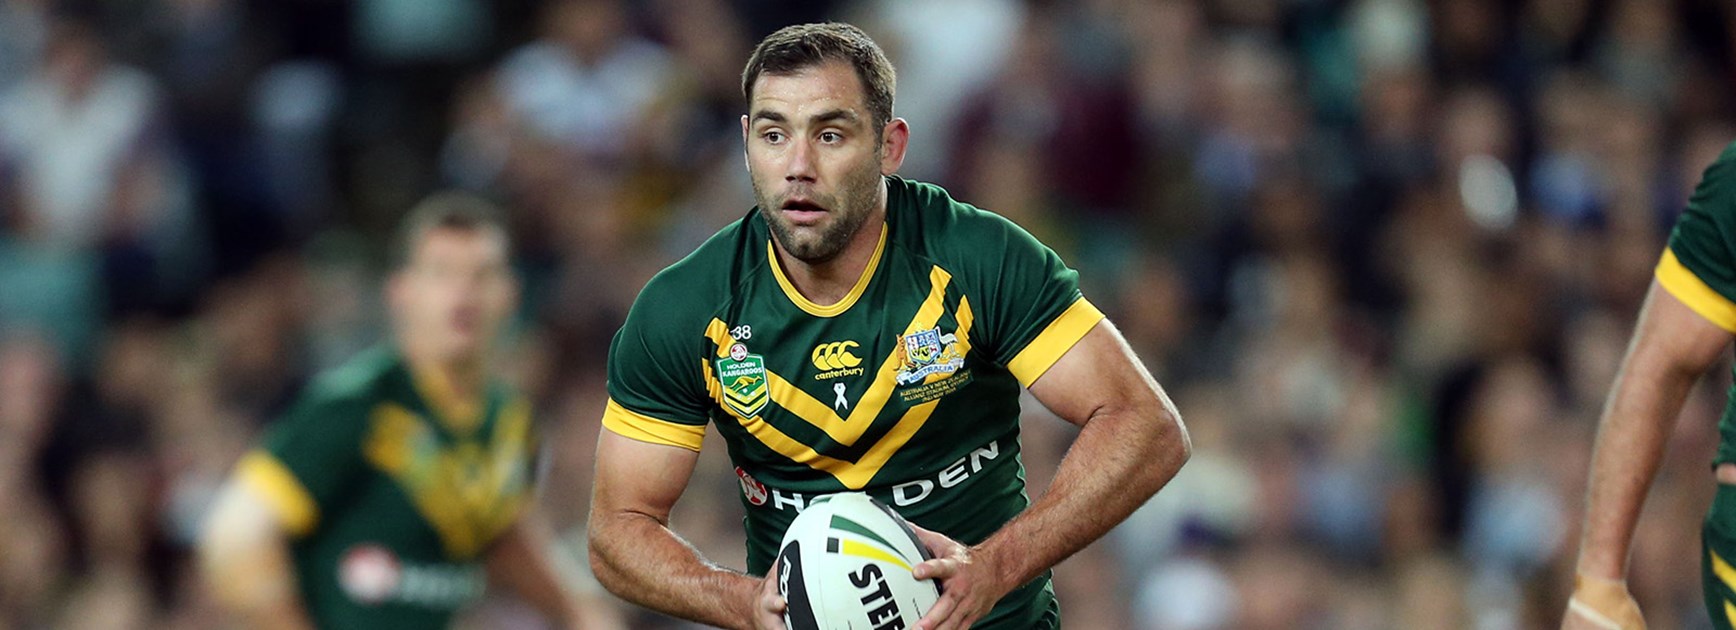 Cameron Smith will lead the Kangaroos in the Anzac Test against New Zealand at Suncorp Stadium.